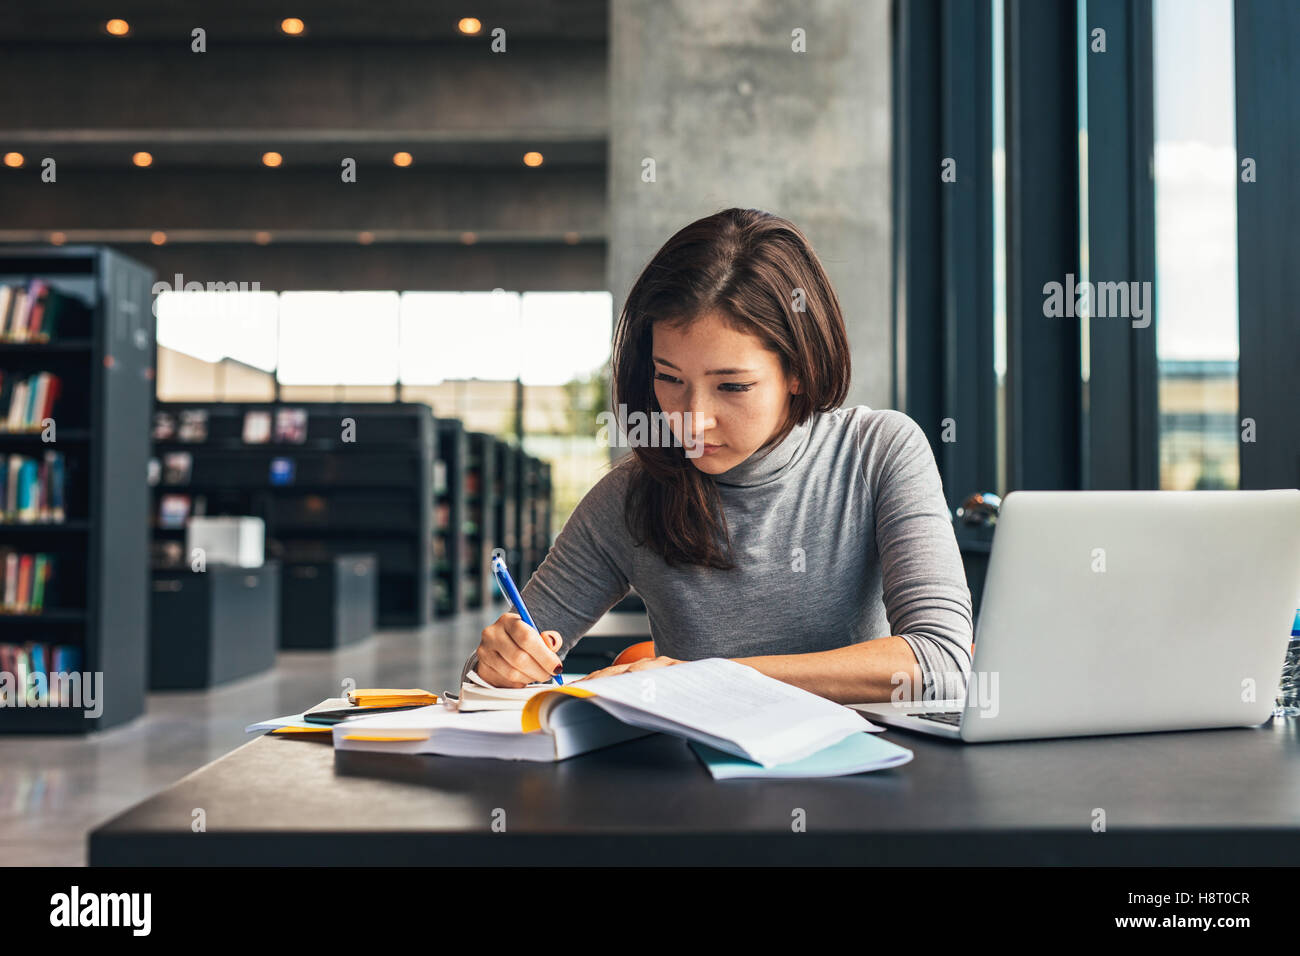 Female student taking notes from a book at library. Young asian woman sitting at table doing assignments in college library. Stock Photo